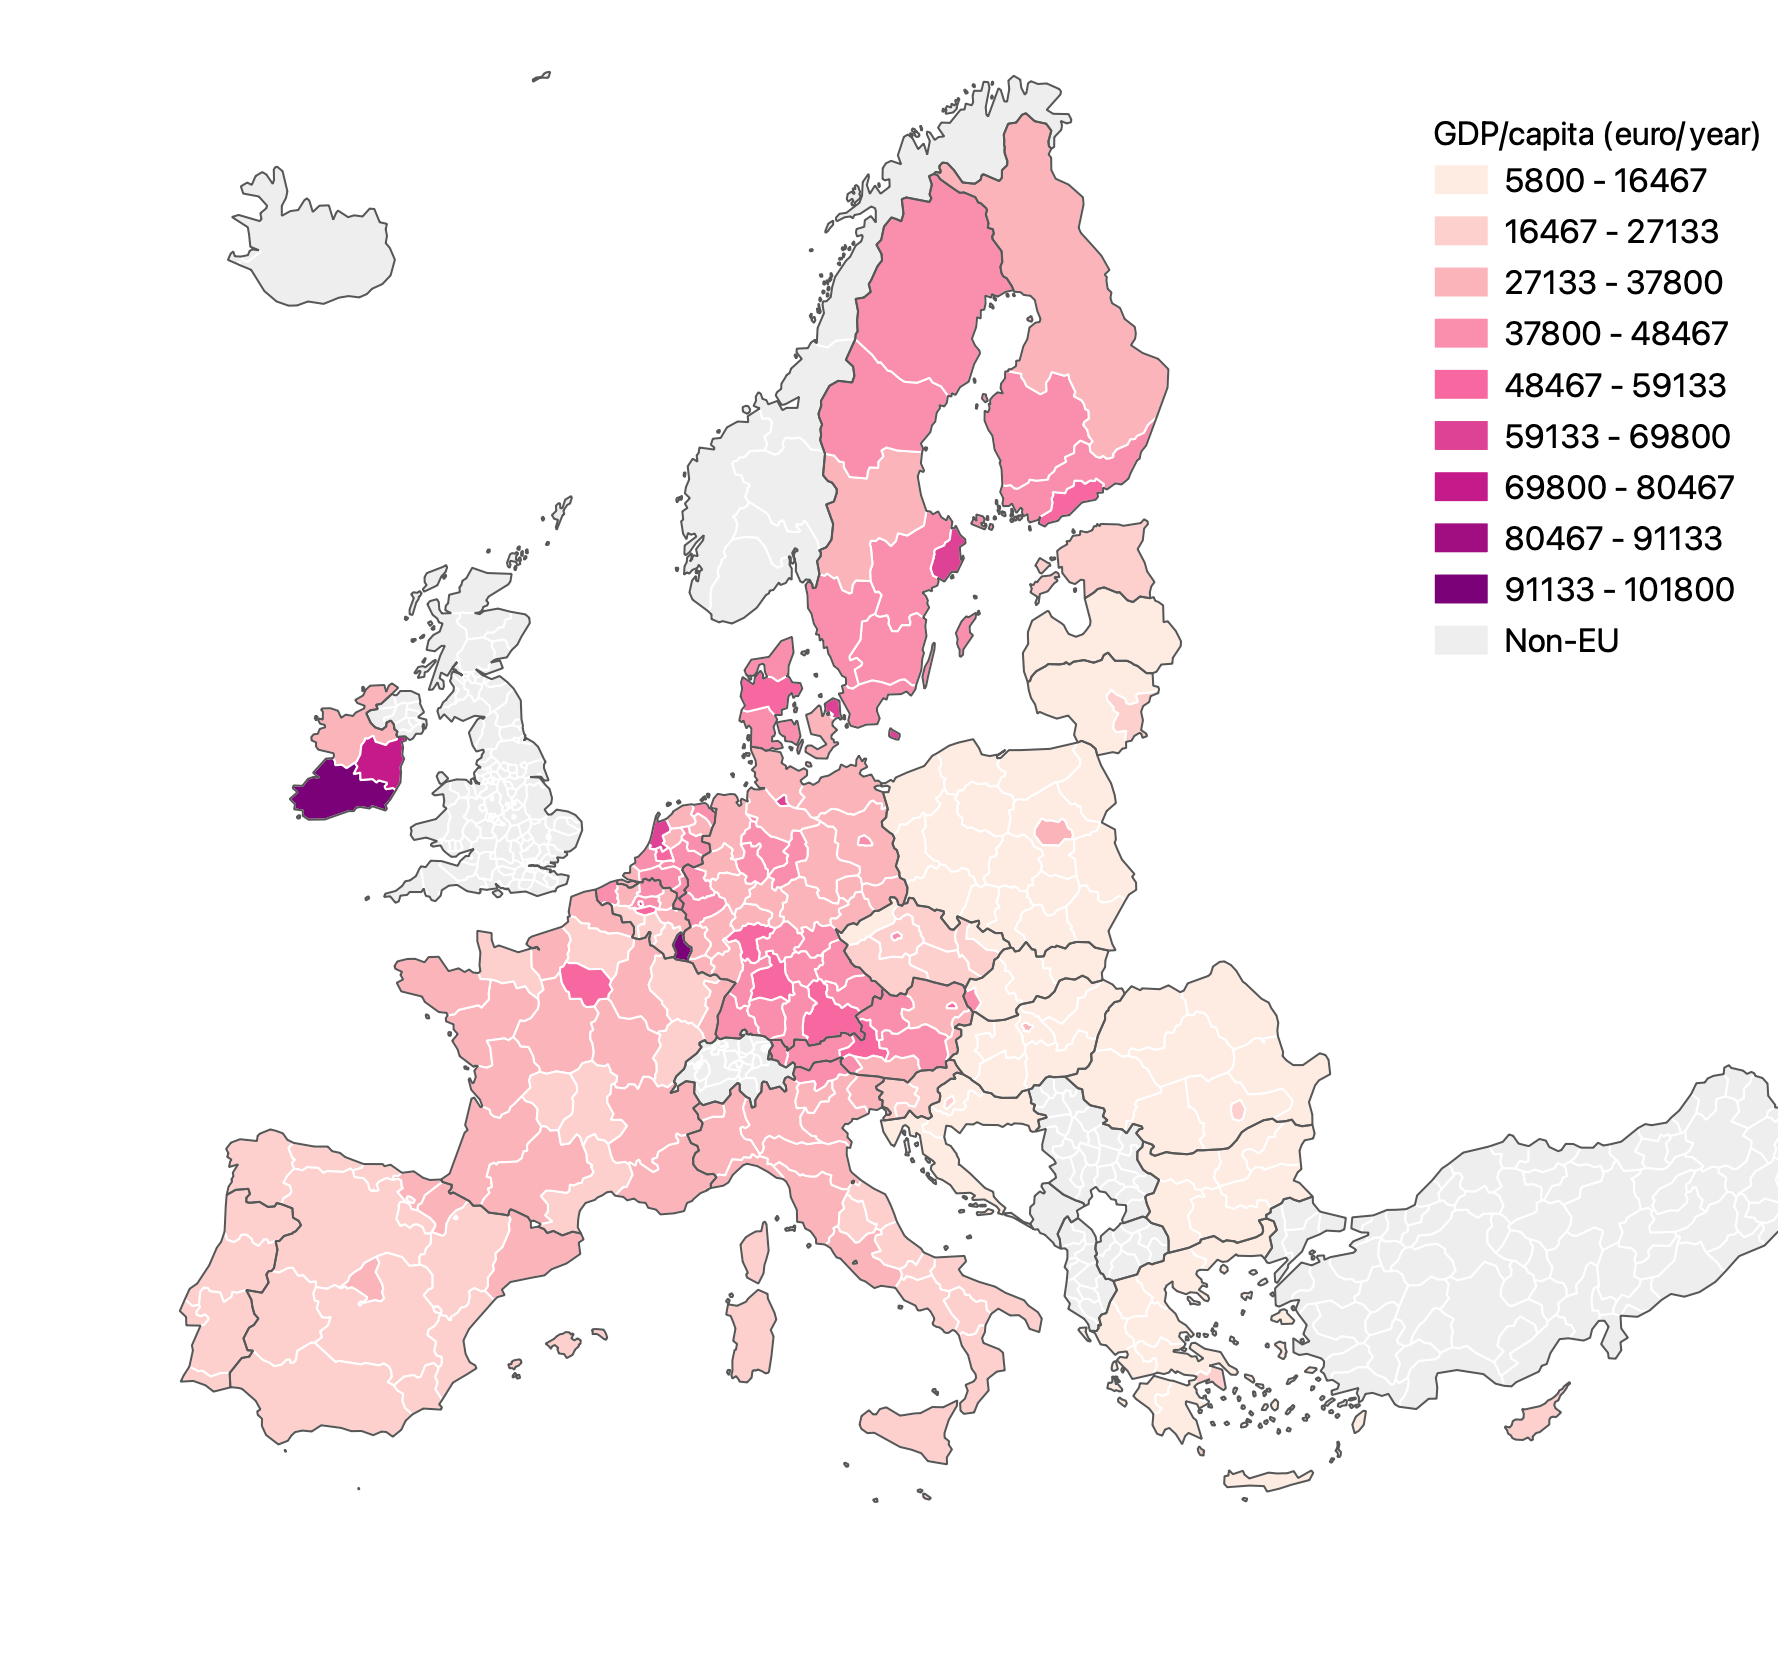 A choropleth map of EU regions showing their GDP/capita using a pink-purple colour scheme